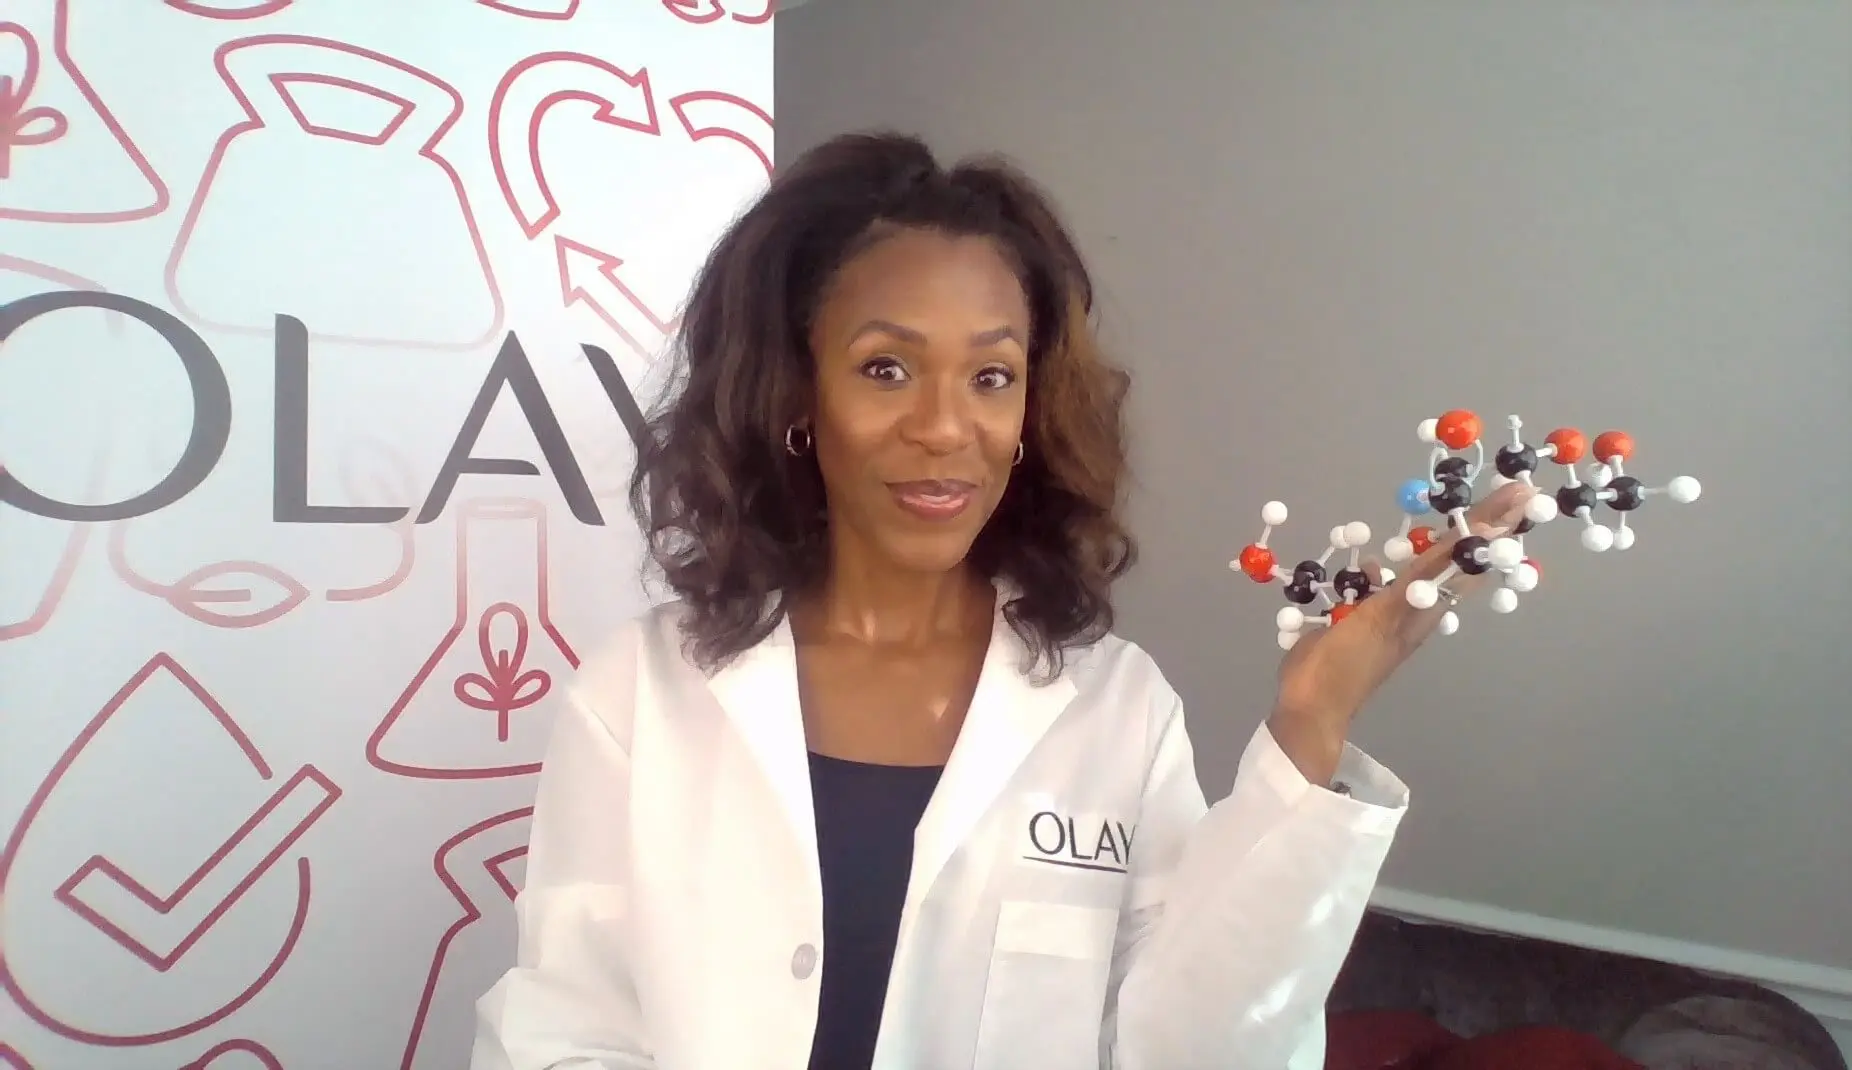 A Black woman with shoulder length hair stands in a labcoat that reads Olay holds a molecular structure with Olay signage in the background.